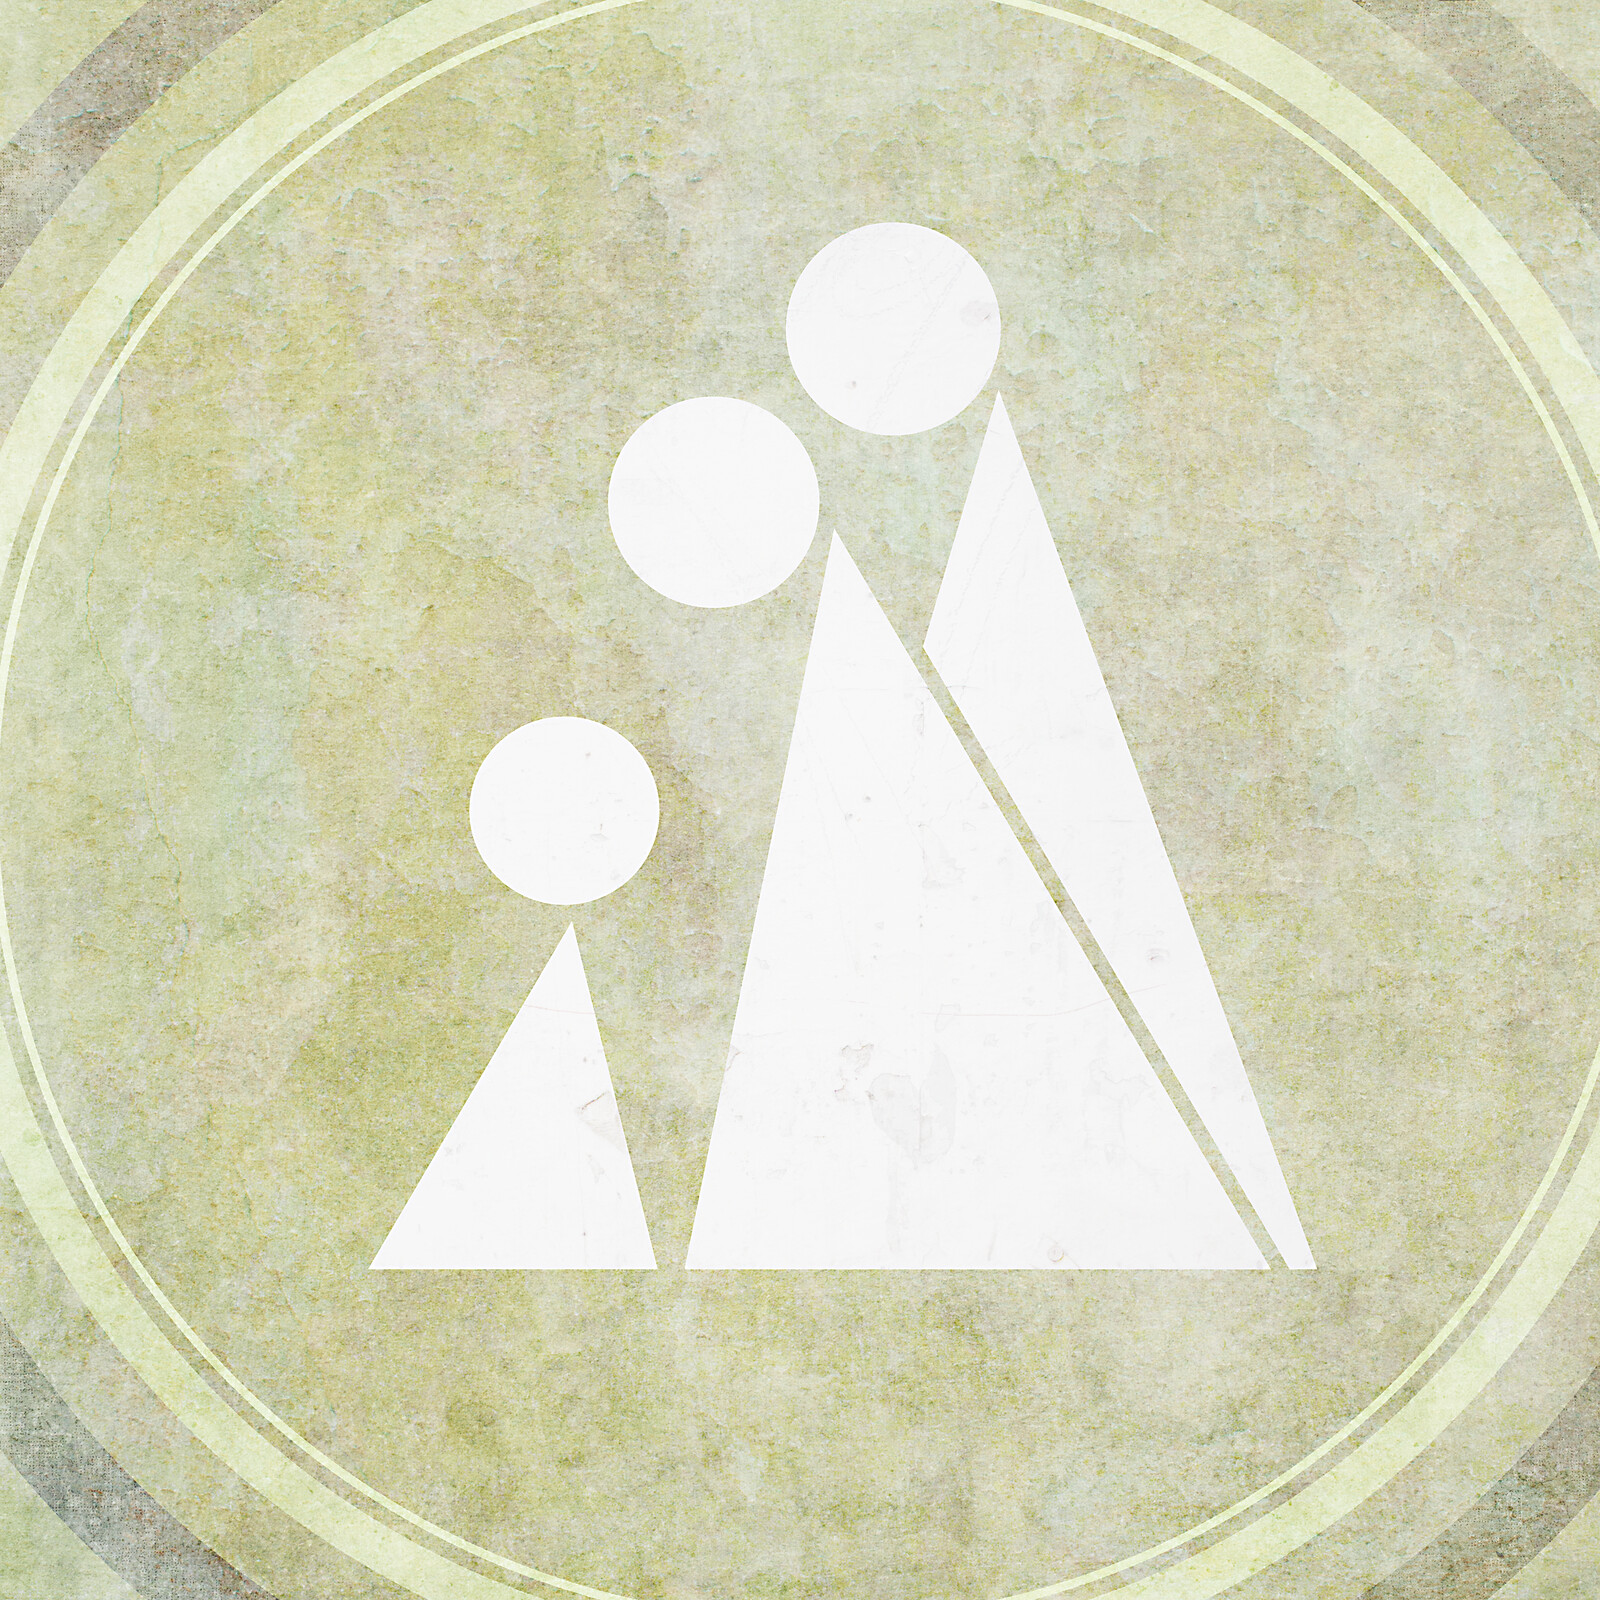 A small white circle-and-triangle figure on the left approaches two larger white circle-and-triangle figures on the right.